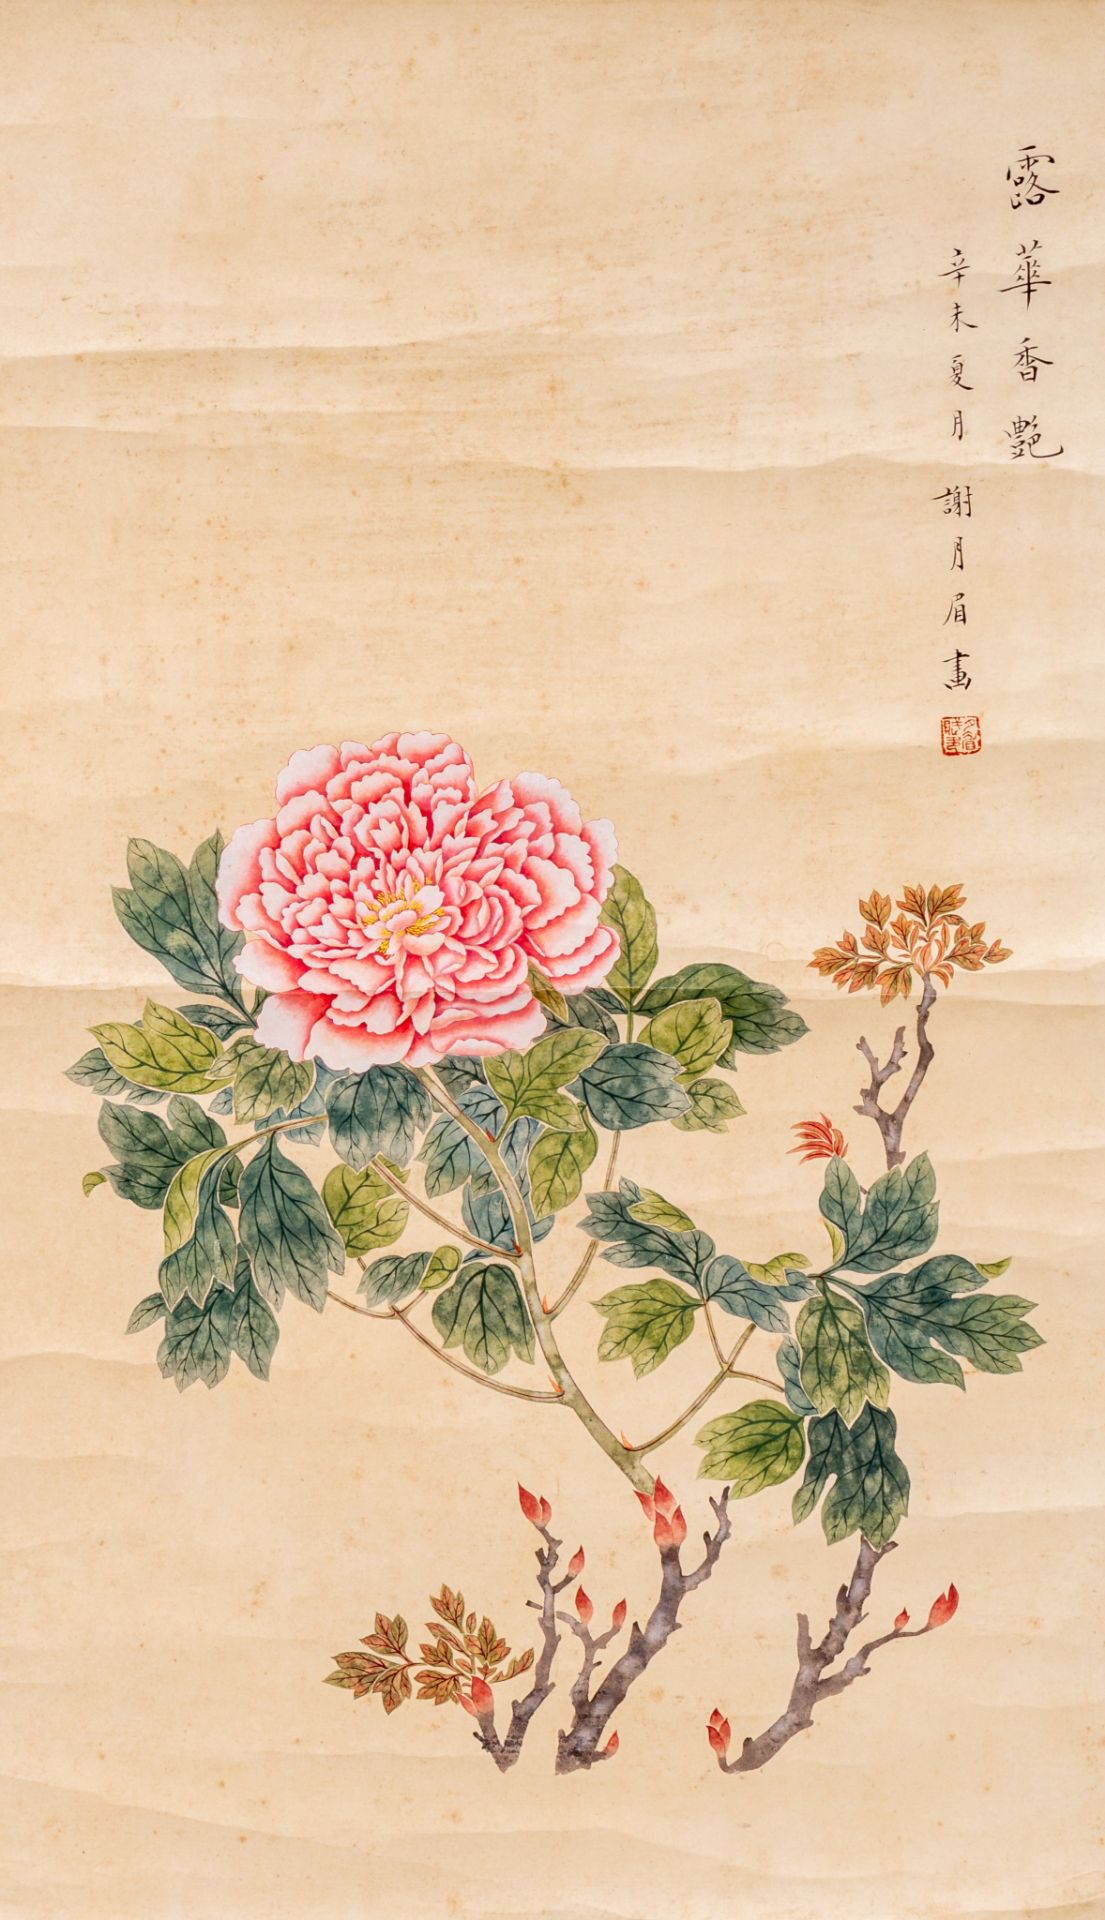 A Chinese 'Peony' scroll painting, watercolour on paper, signature reading Xie Yue Mei, 33 x 57 cm